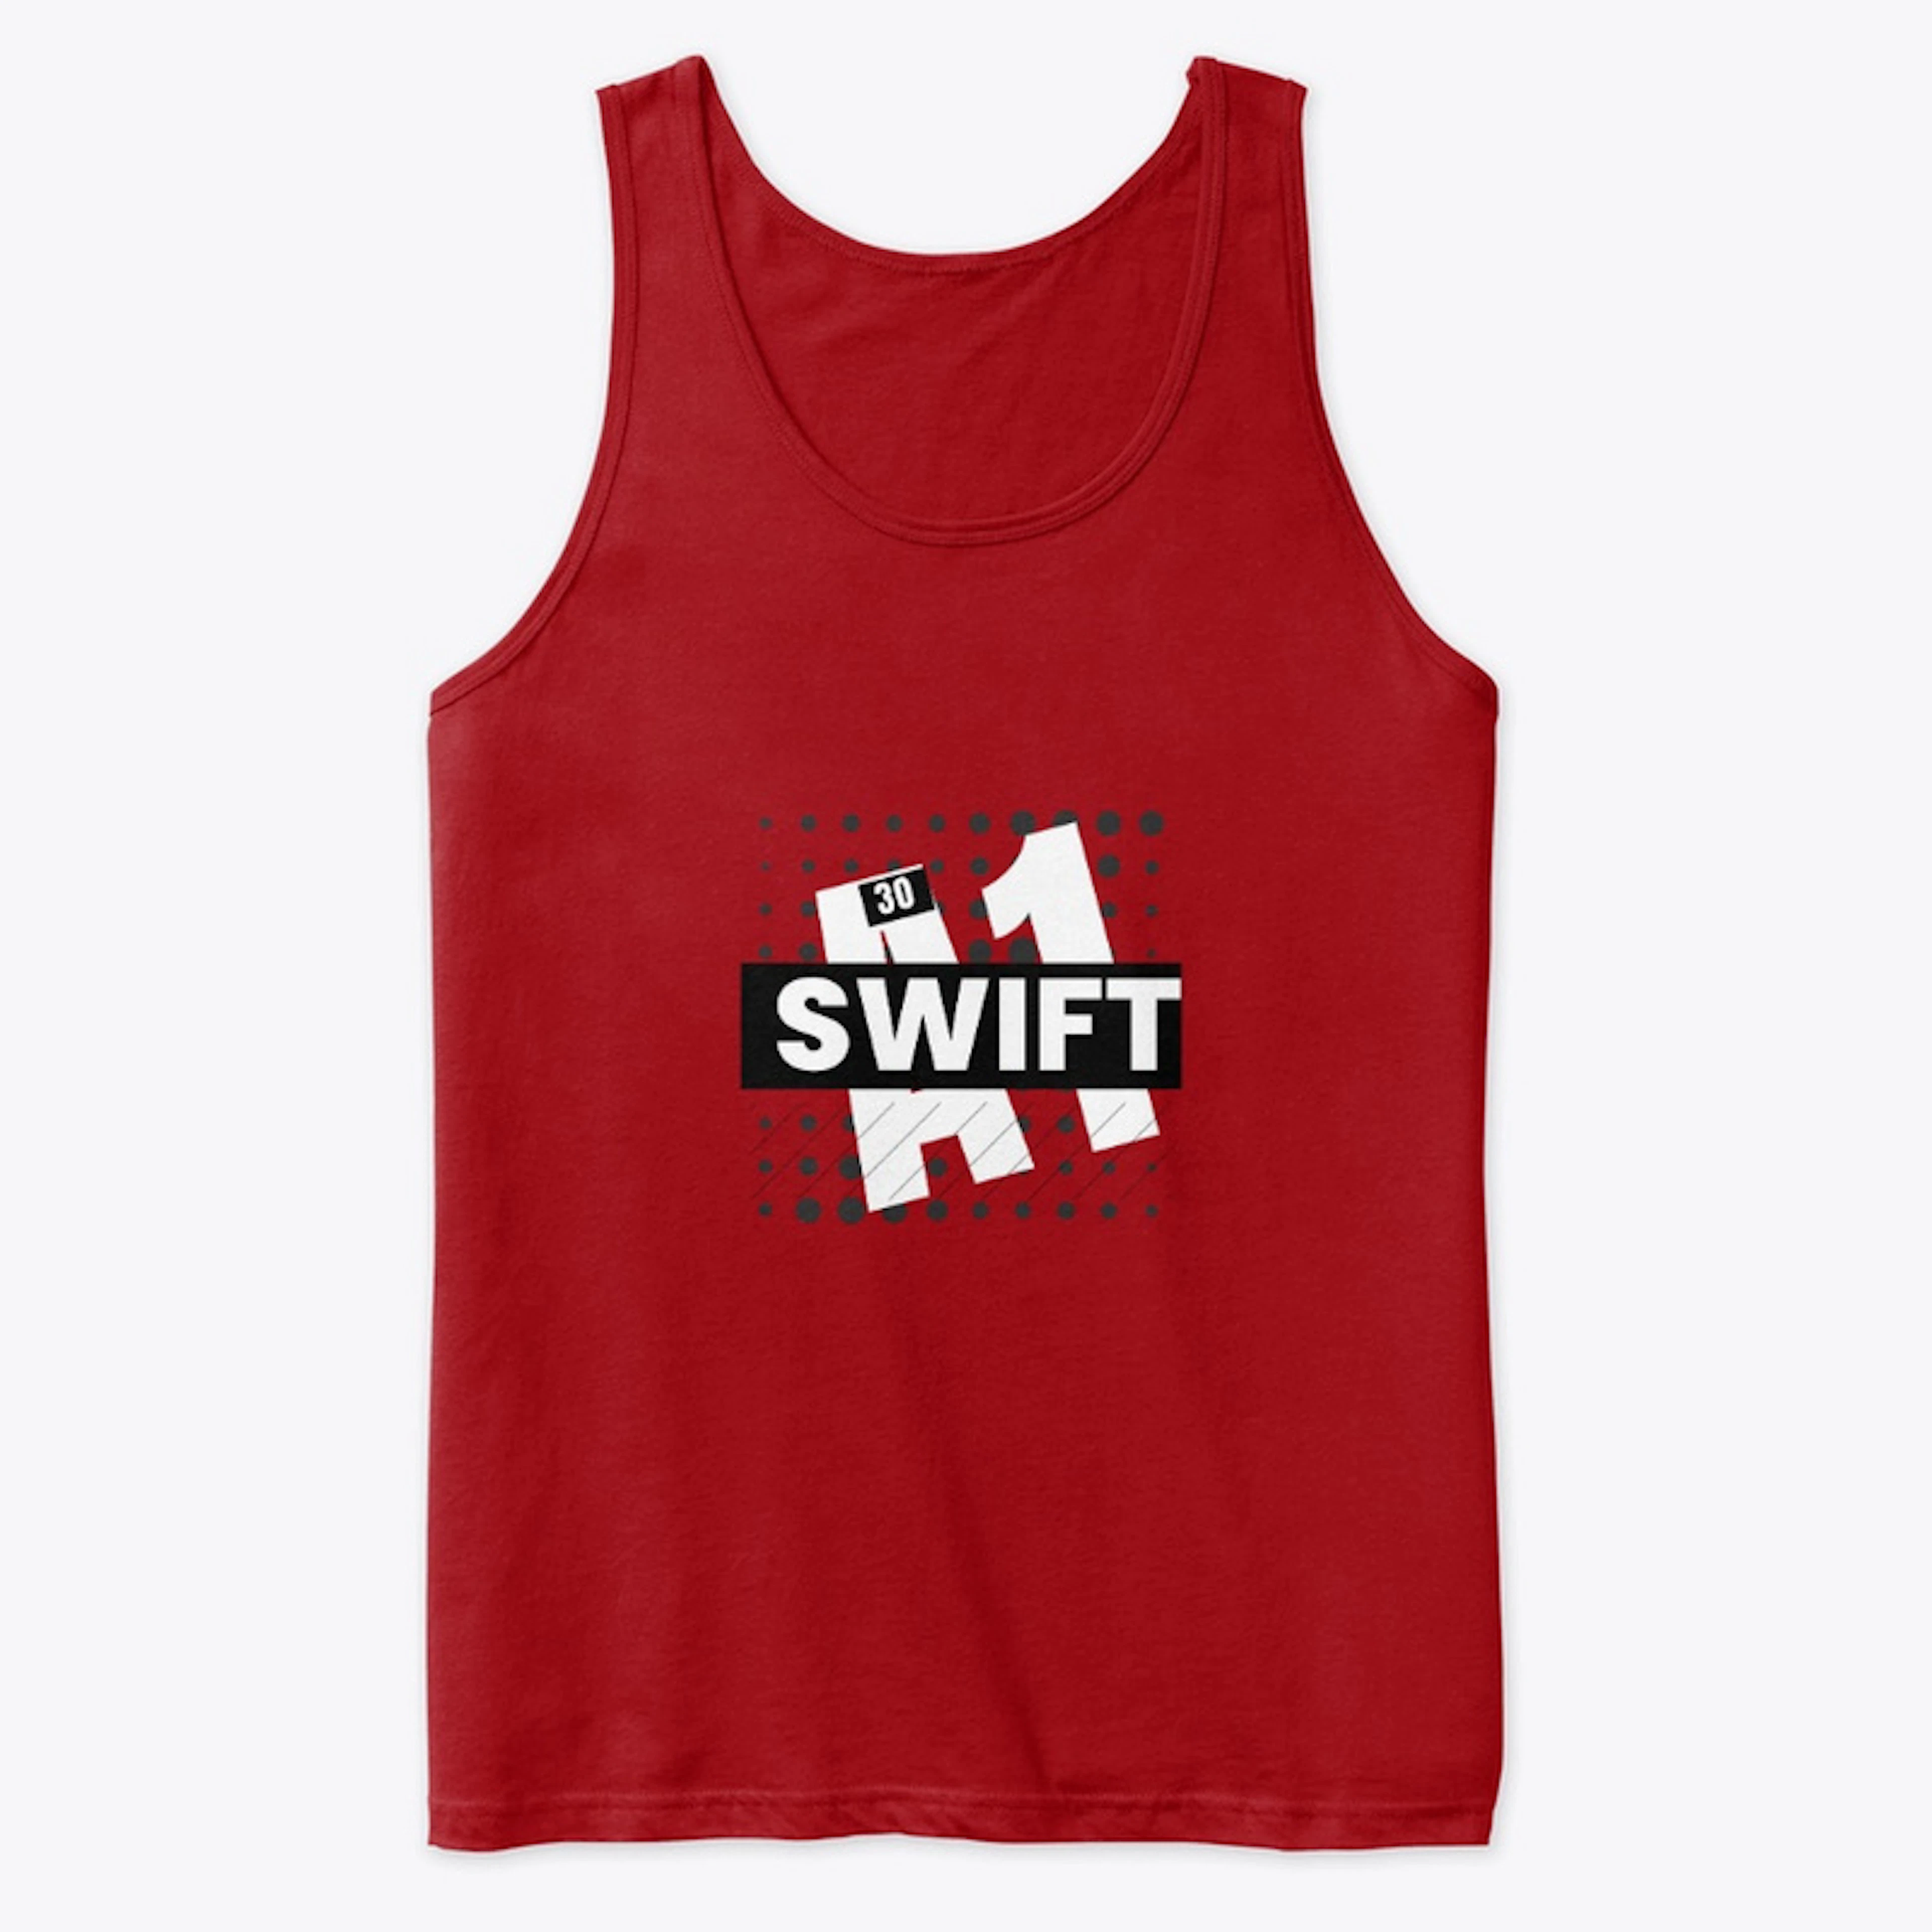 SWIFT 30 Collection 